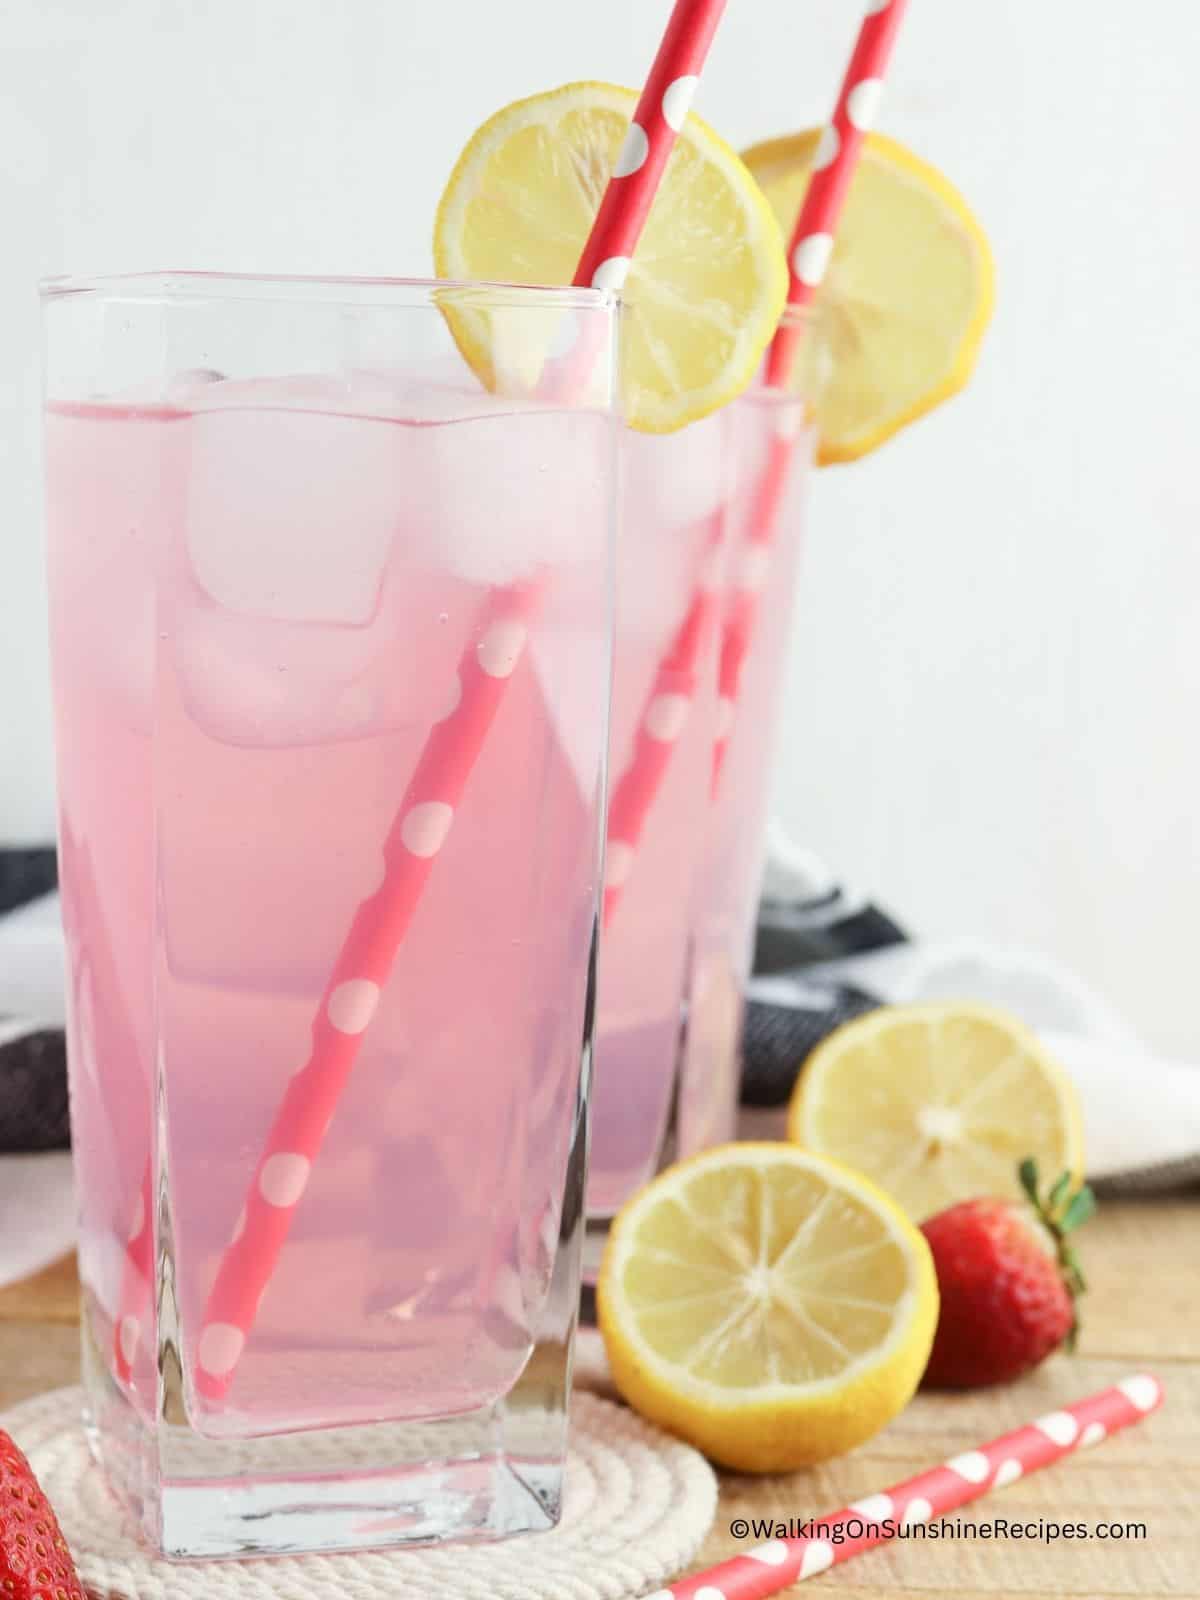 2 glasses of strawberry beverage with sliced lemons, strawberries and straws.